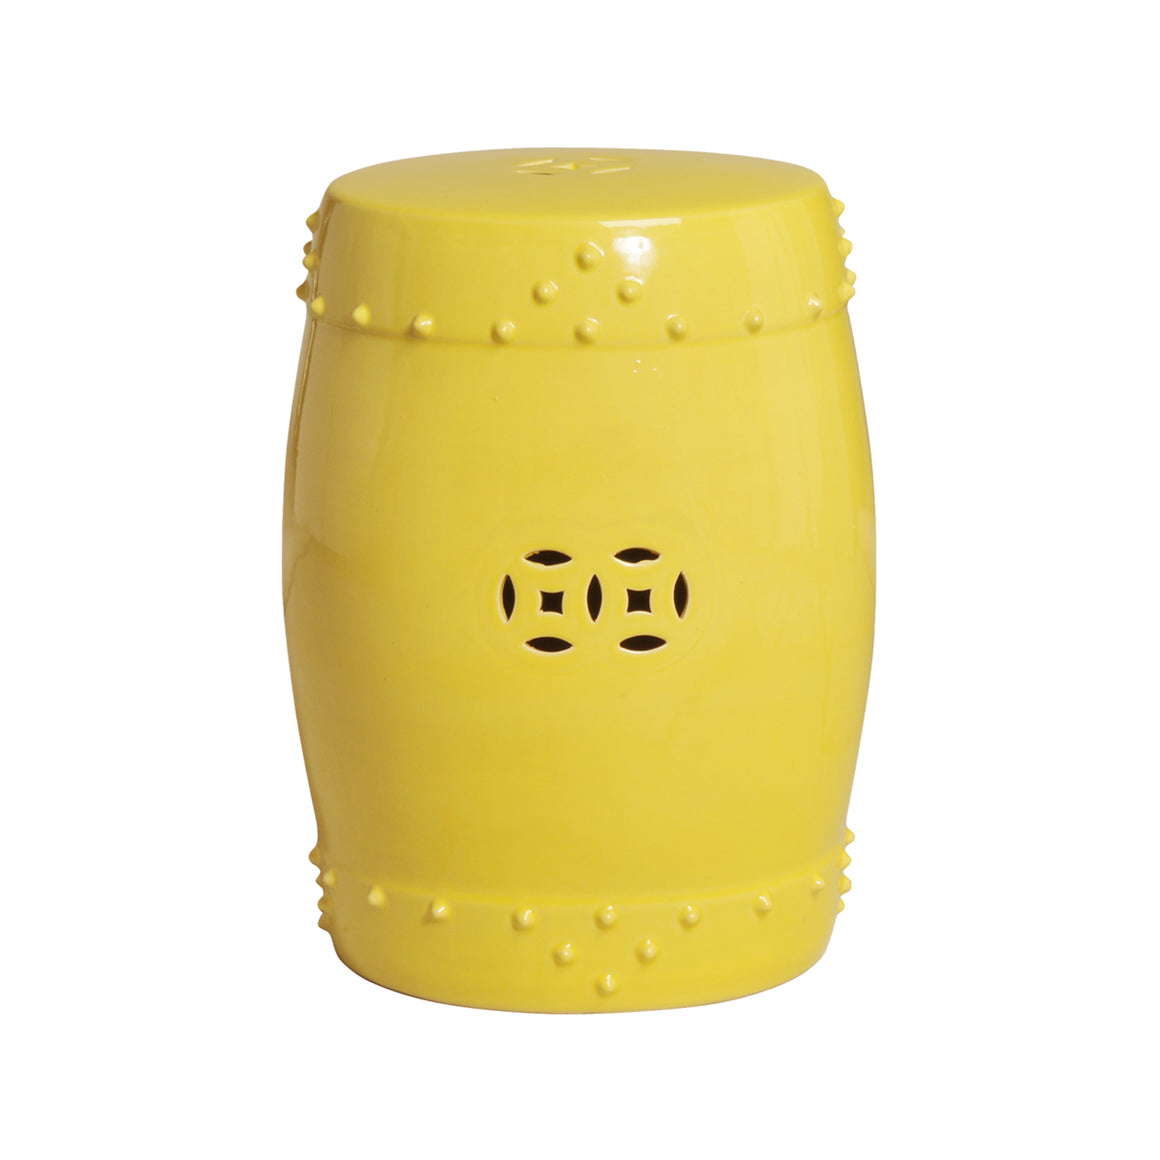 Drum Garden Stool/Table with a Yellow Glaze